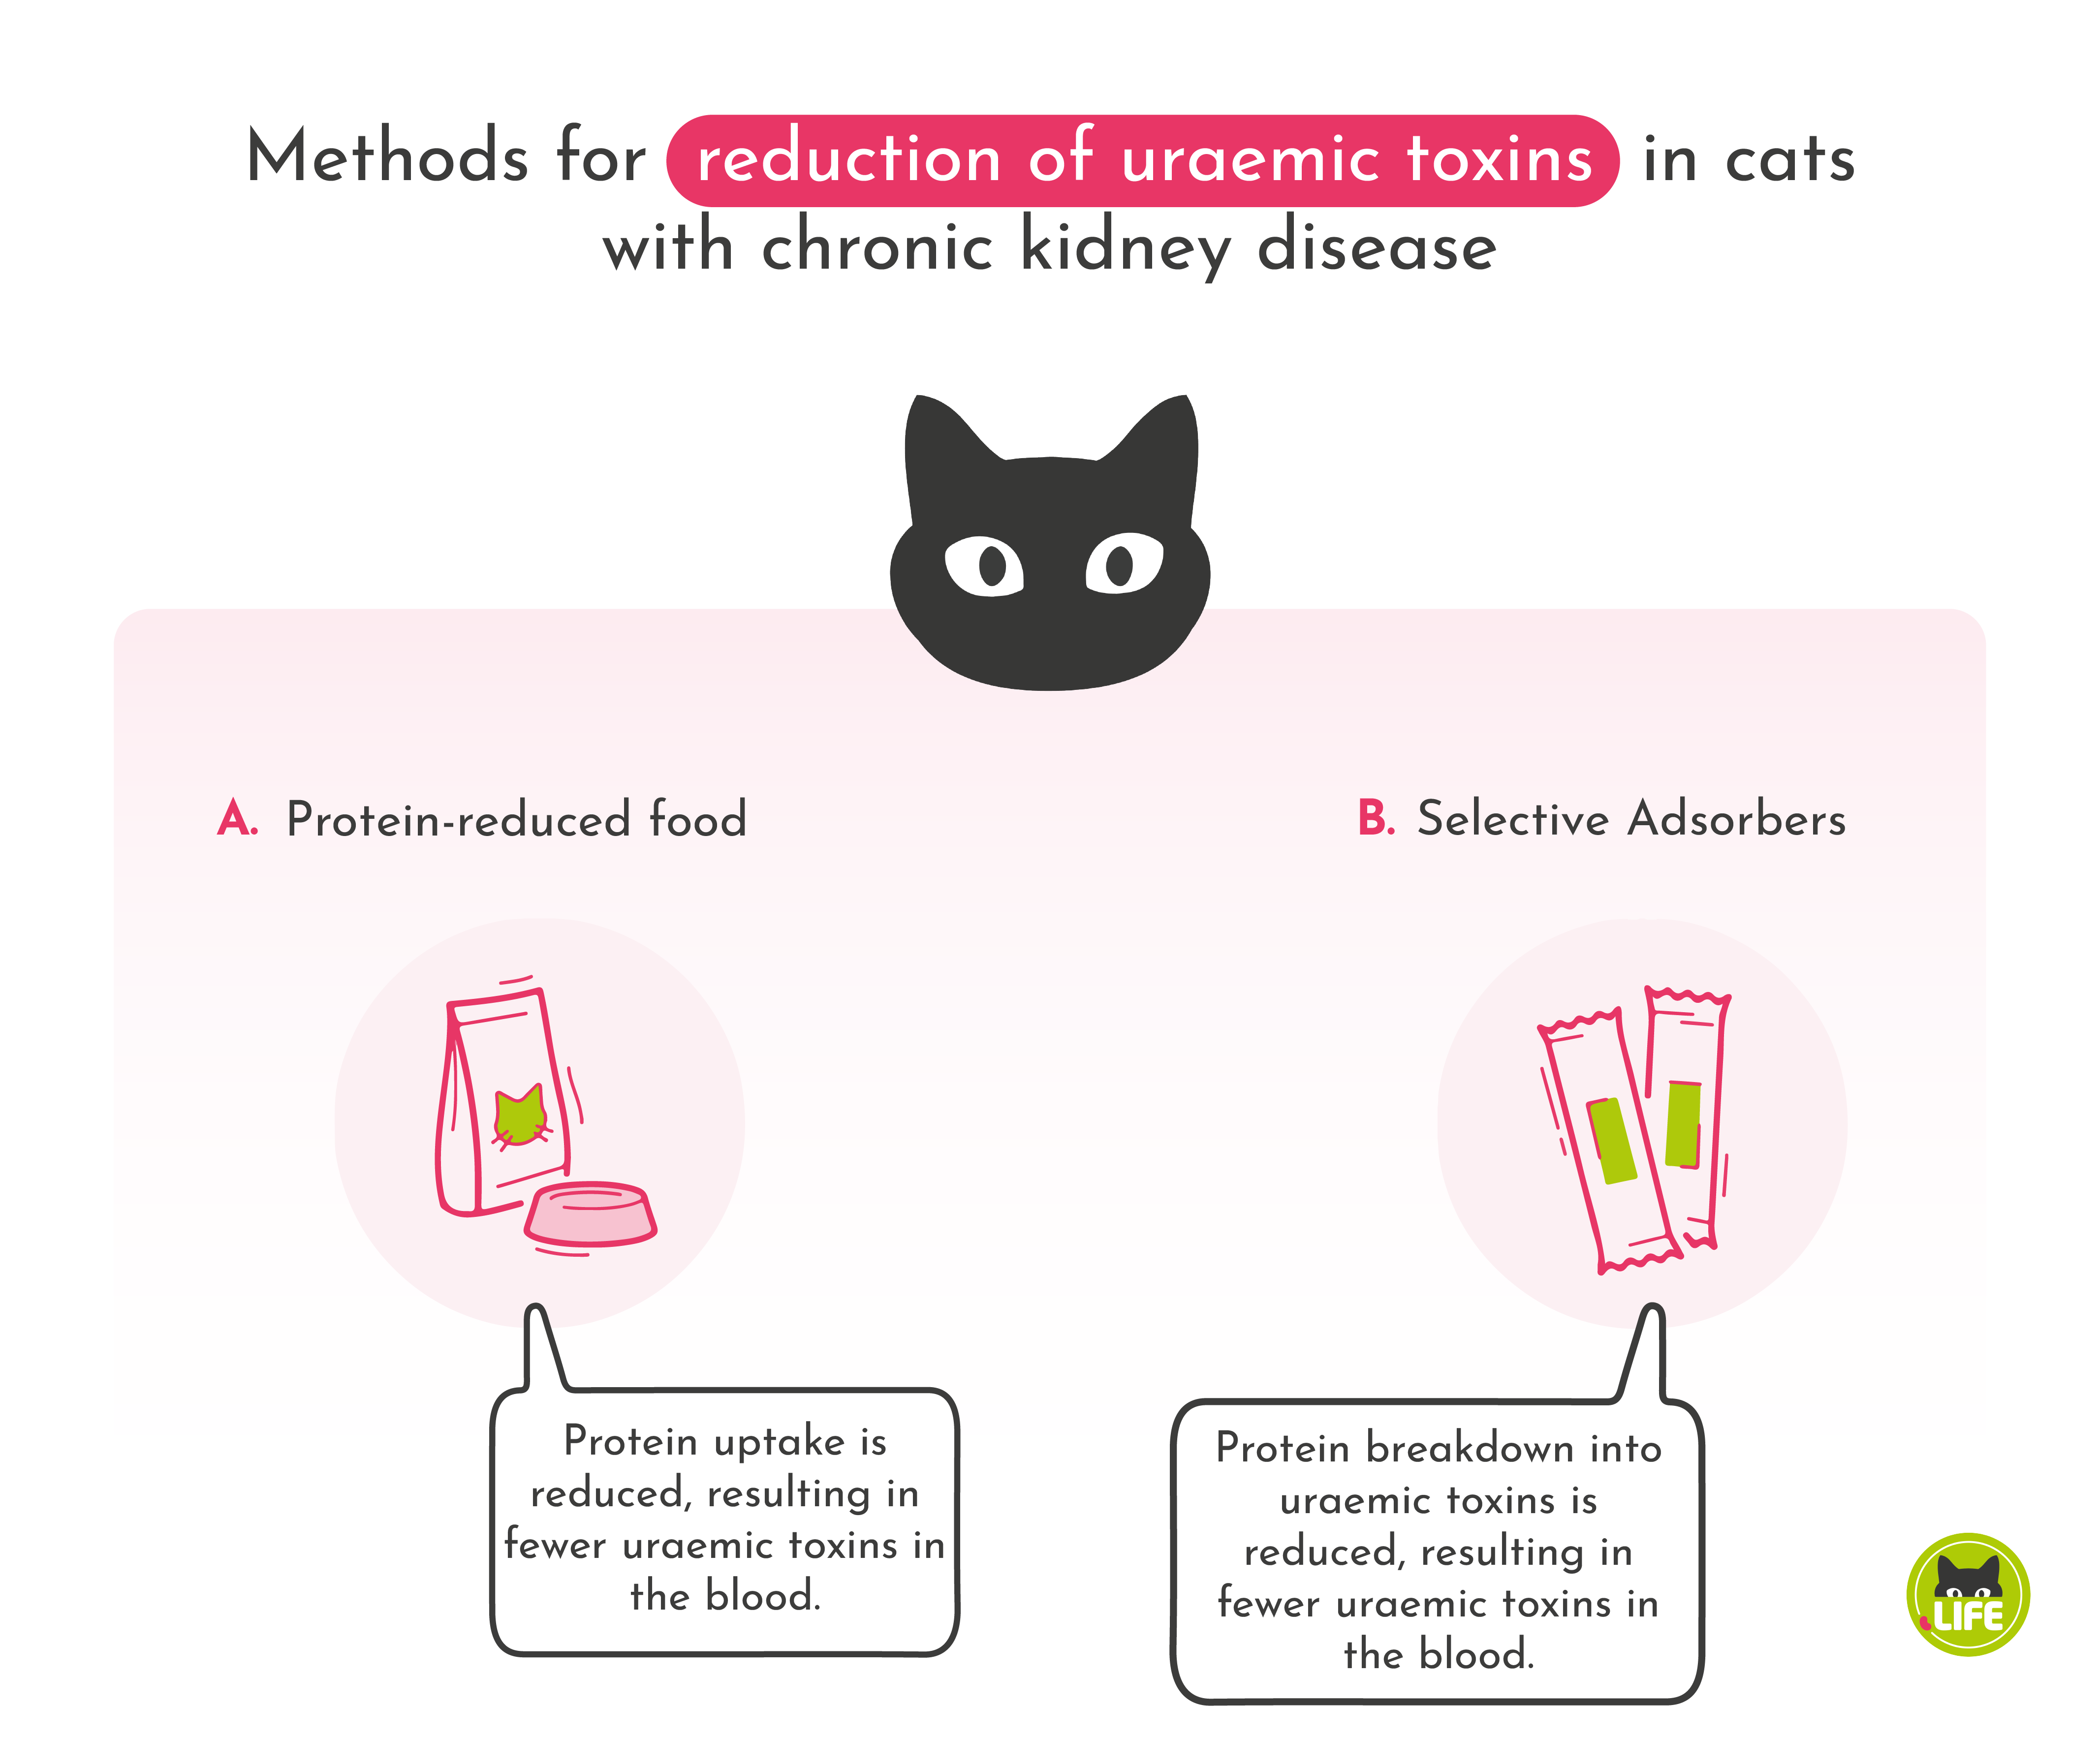 Methods for reducing uraemic toxins in cats with chronic kidney disease.